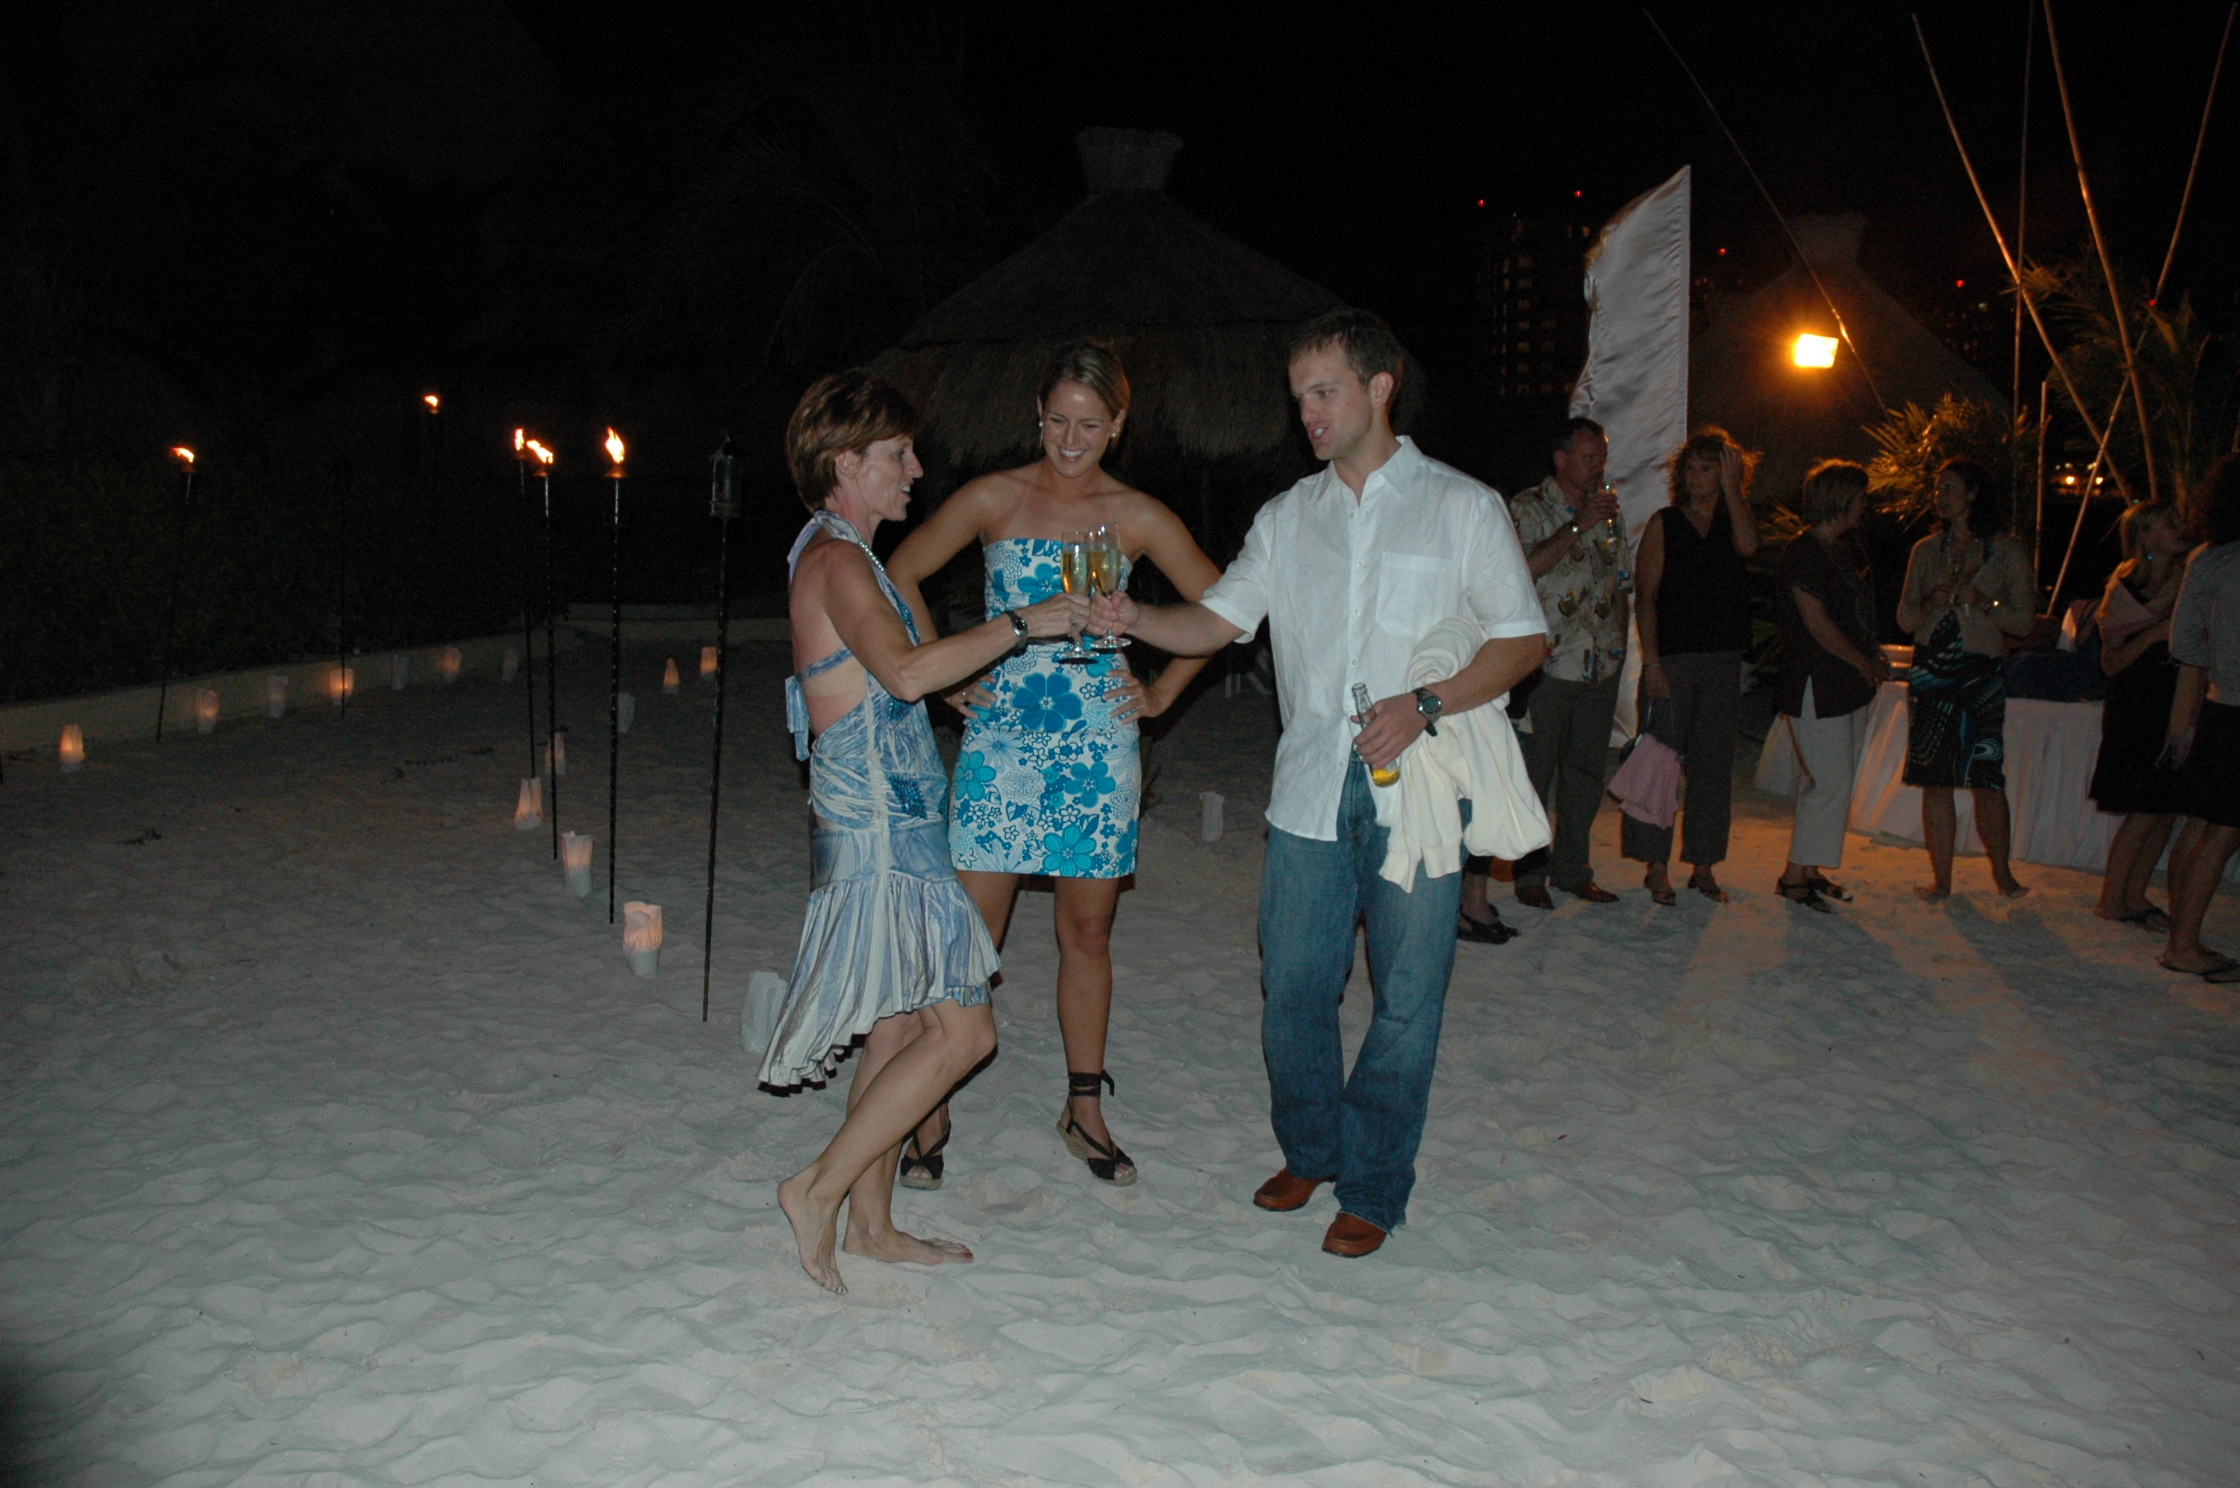 In the beautiful white sand of Cancun, Hilary instructs Jytte and Jackson on the finer points of the 